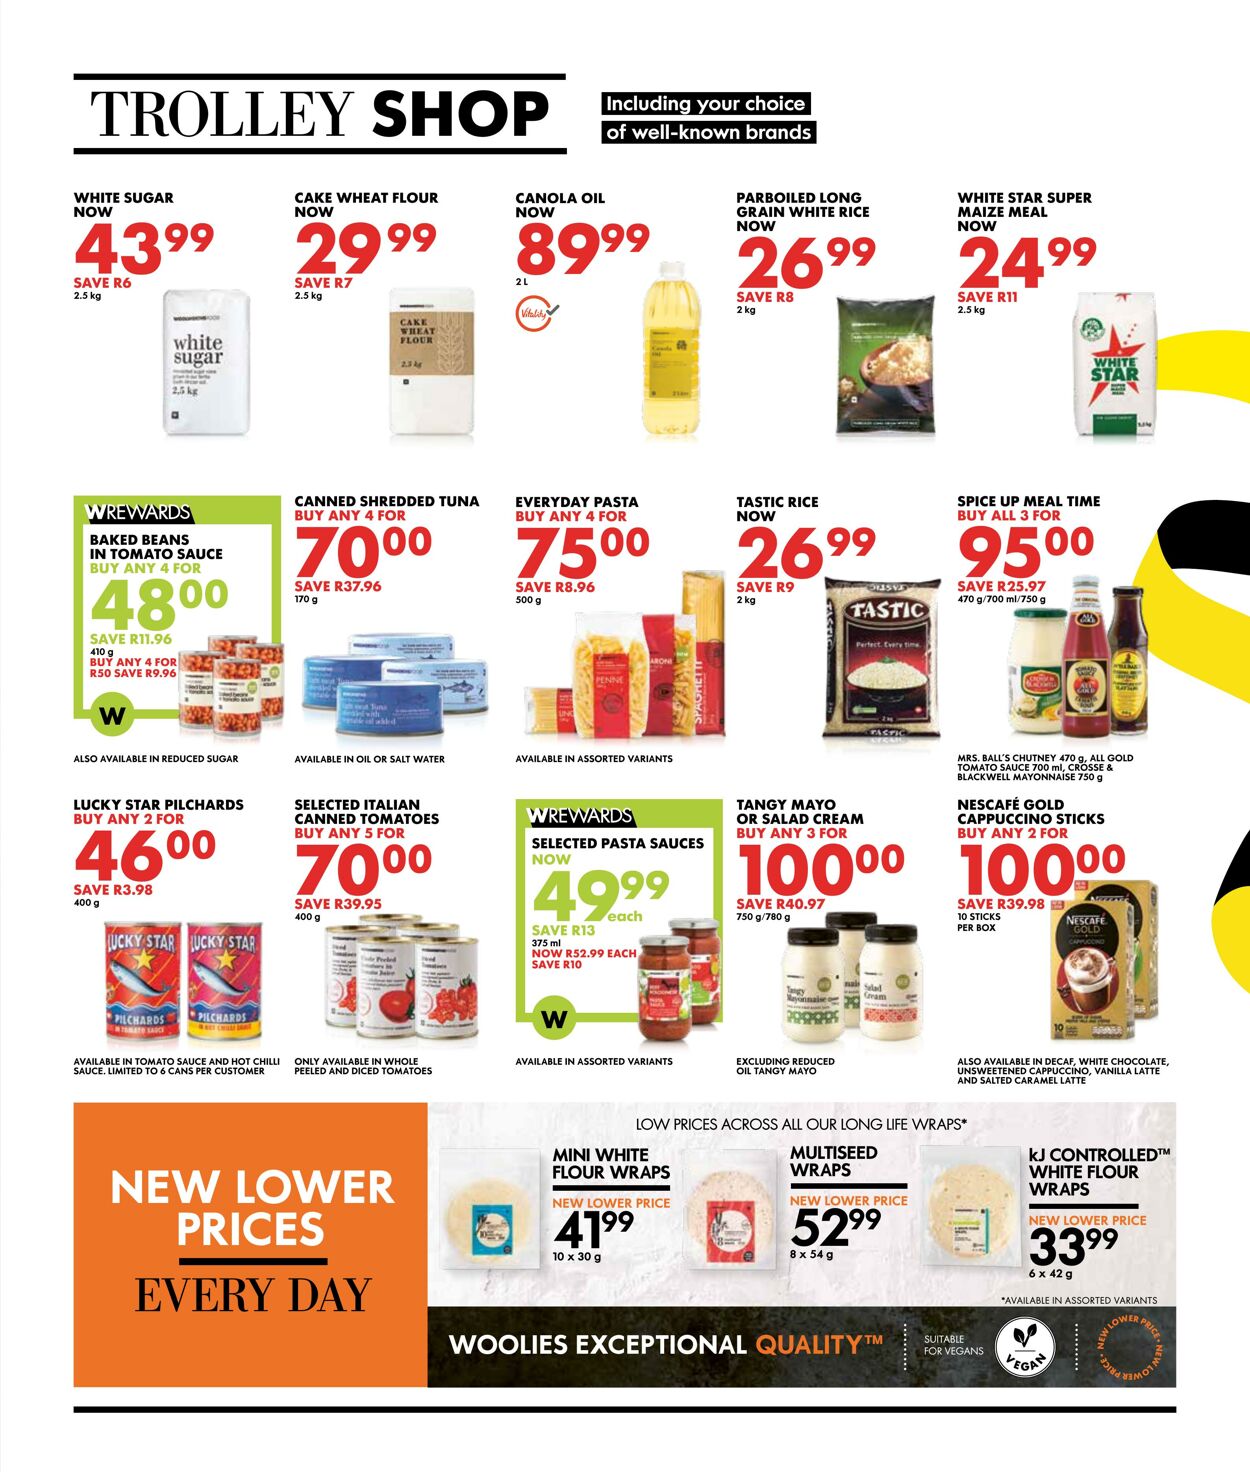 Special Woolworths 21.11.2022 - 04.12.2022